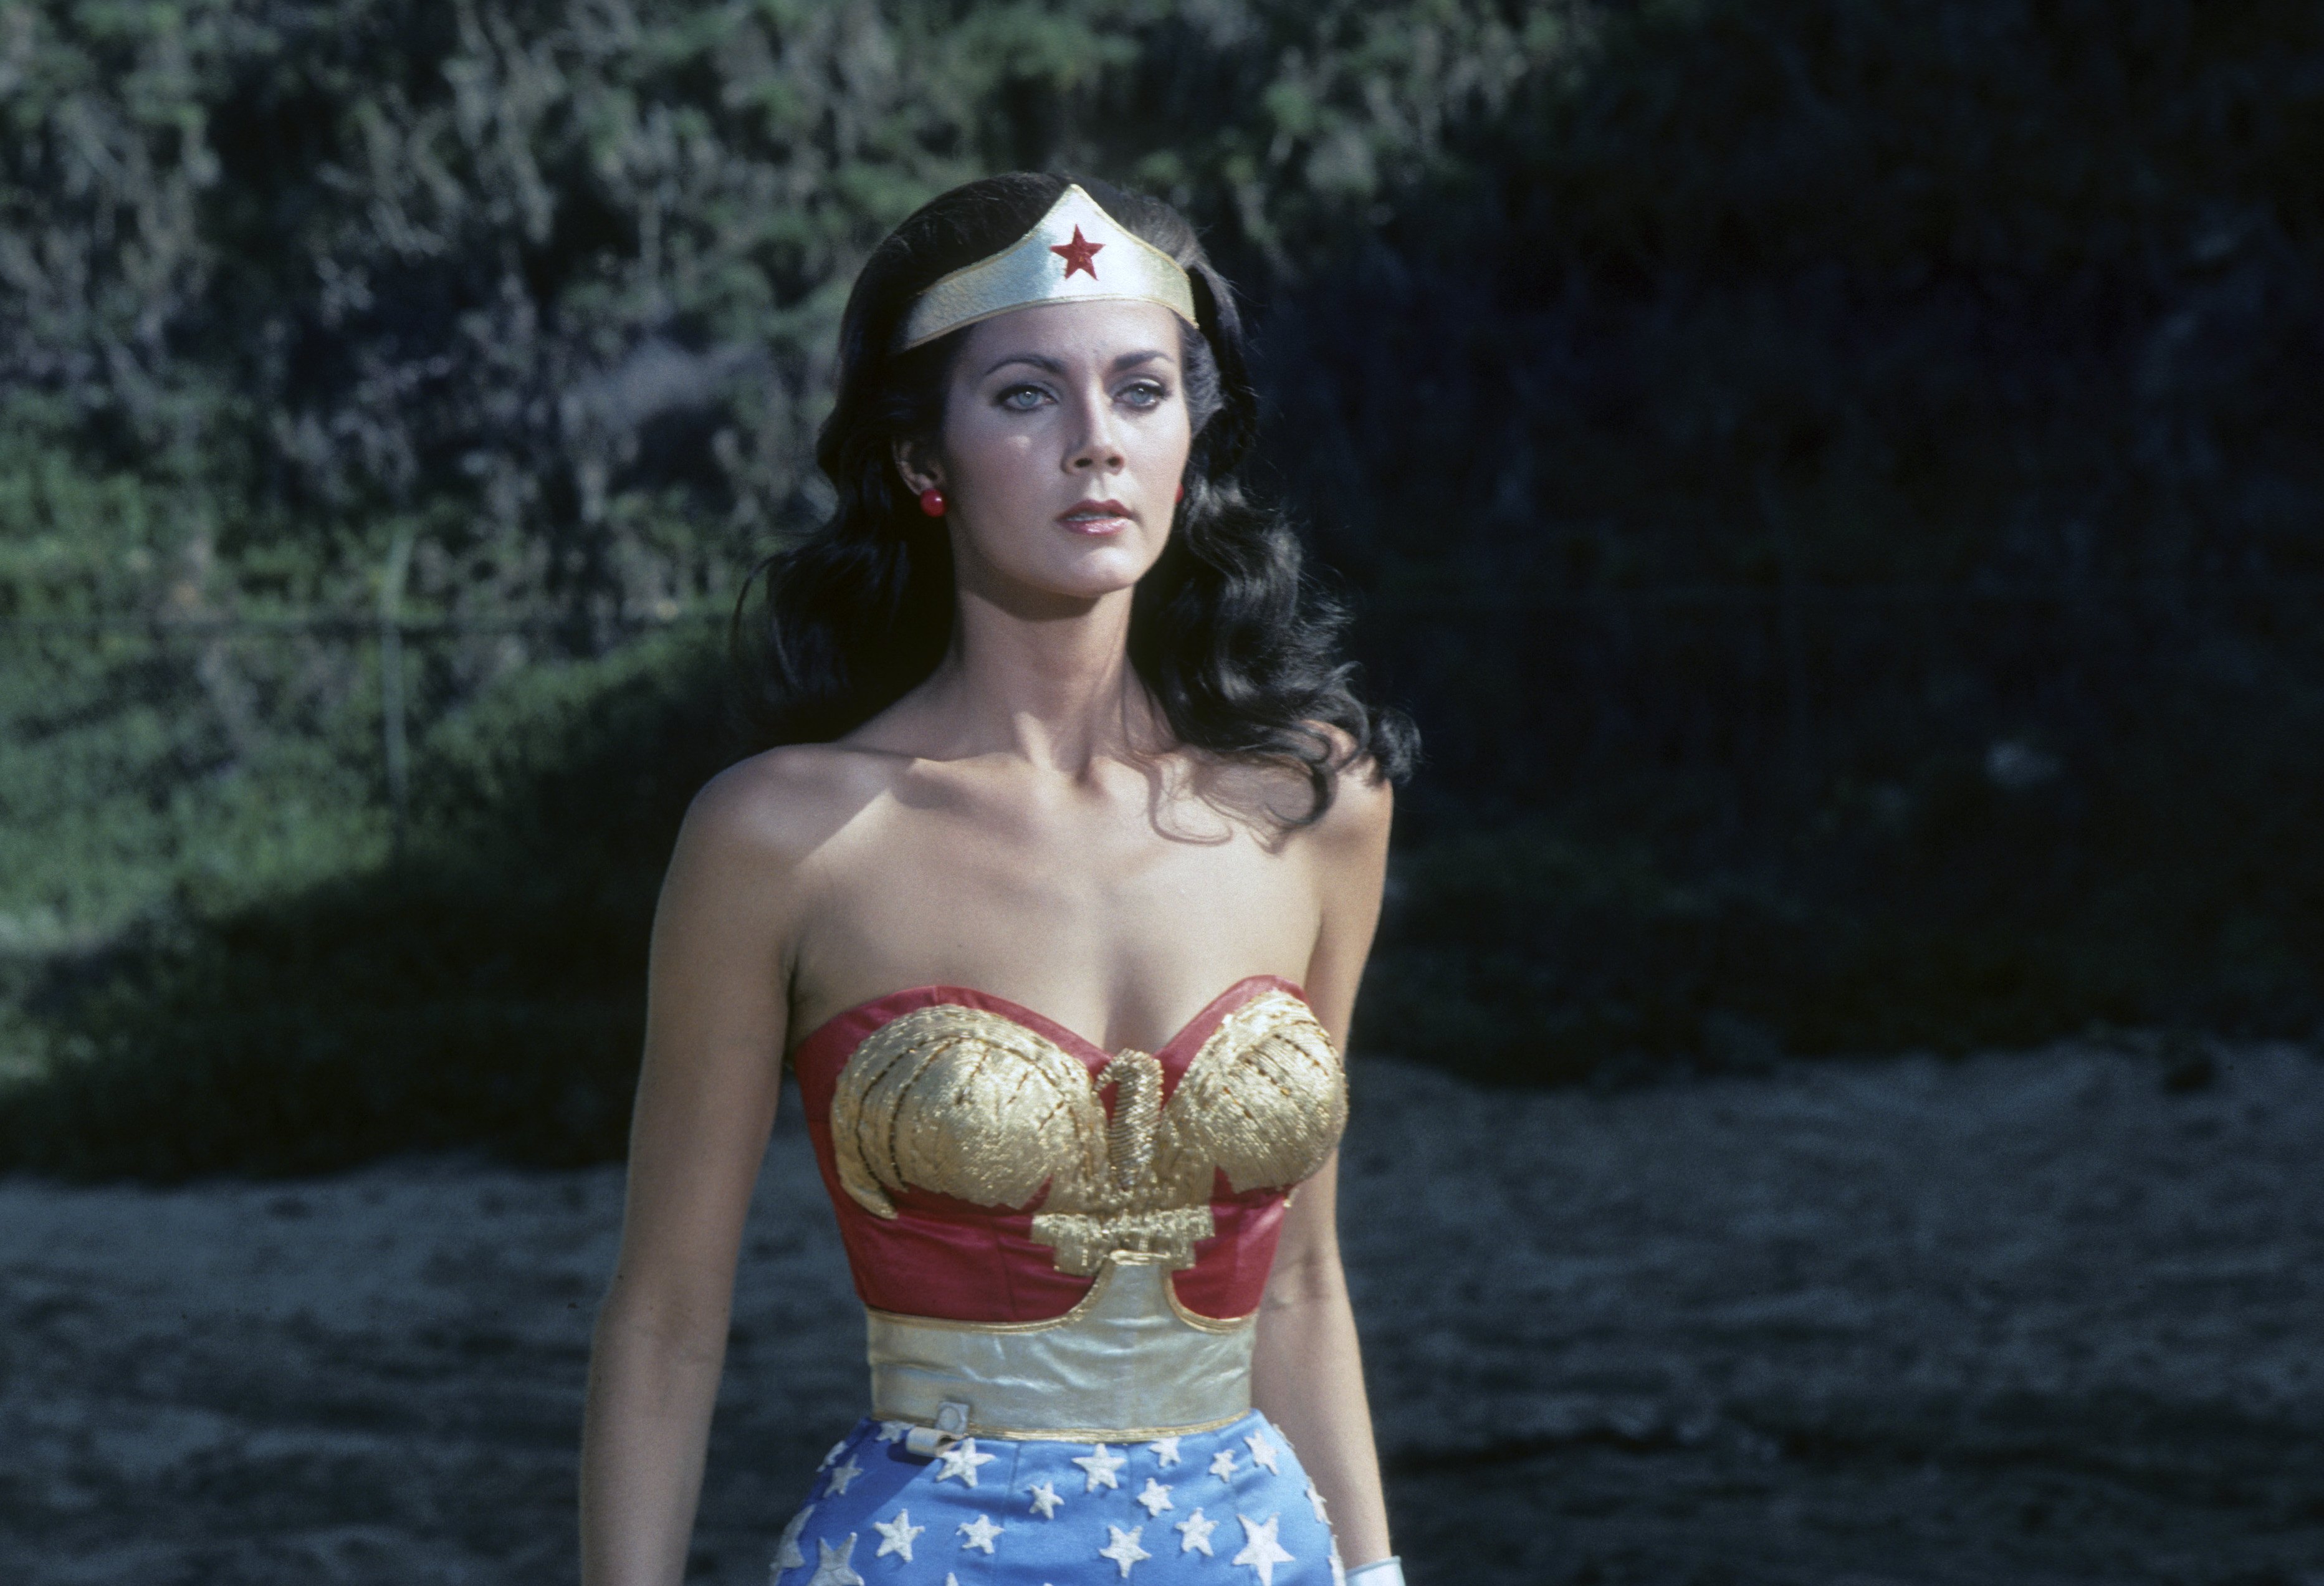 Lynda Carter as Wonder Woman on January 22, 1977. (ABC Photo Archives—ABC via Getty Images)